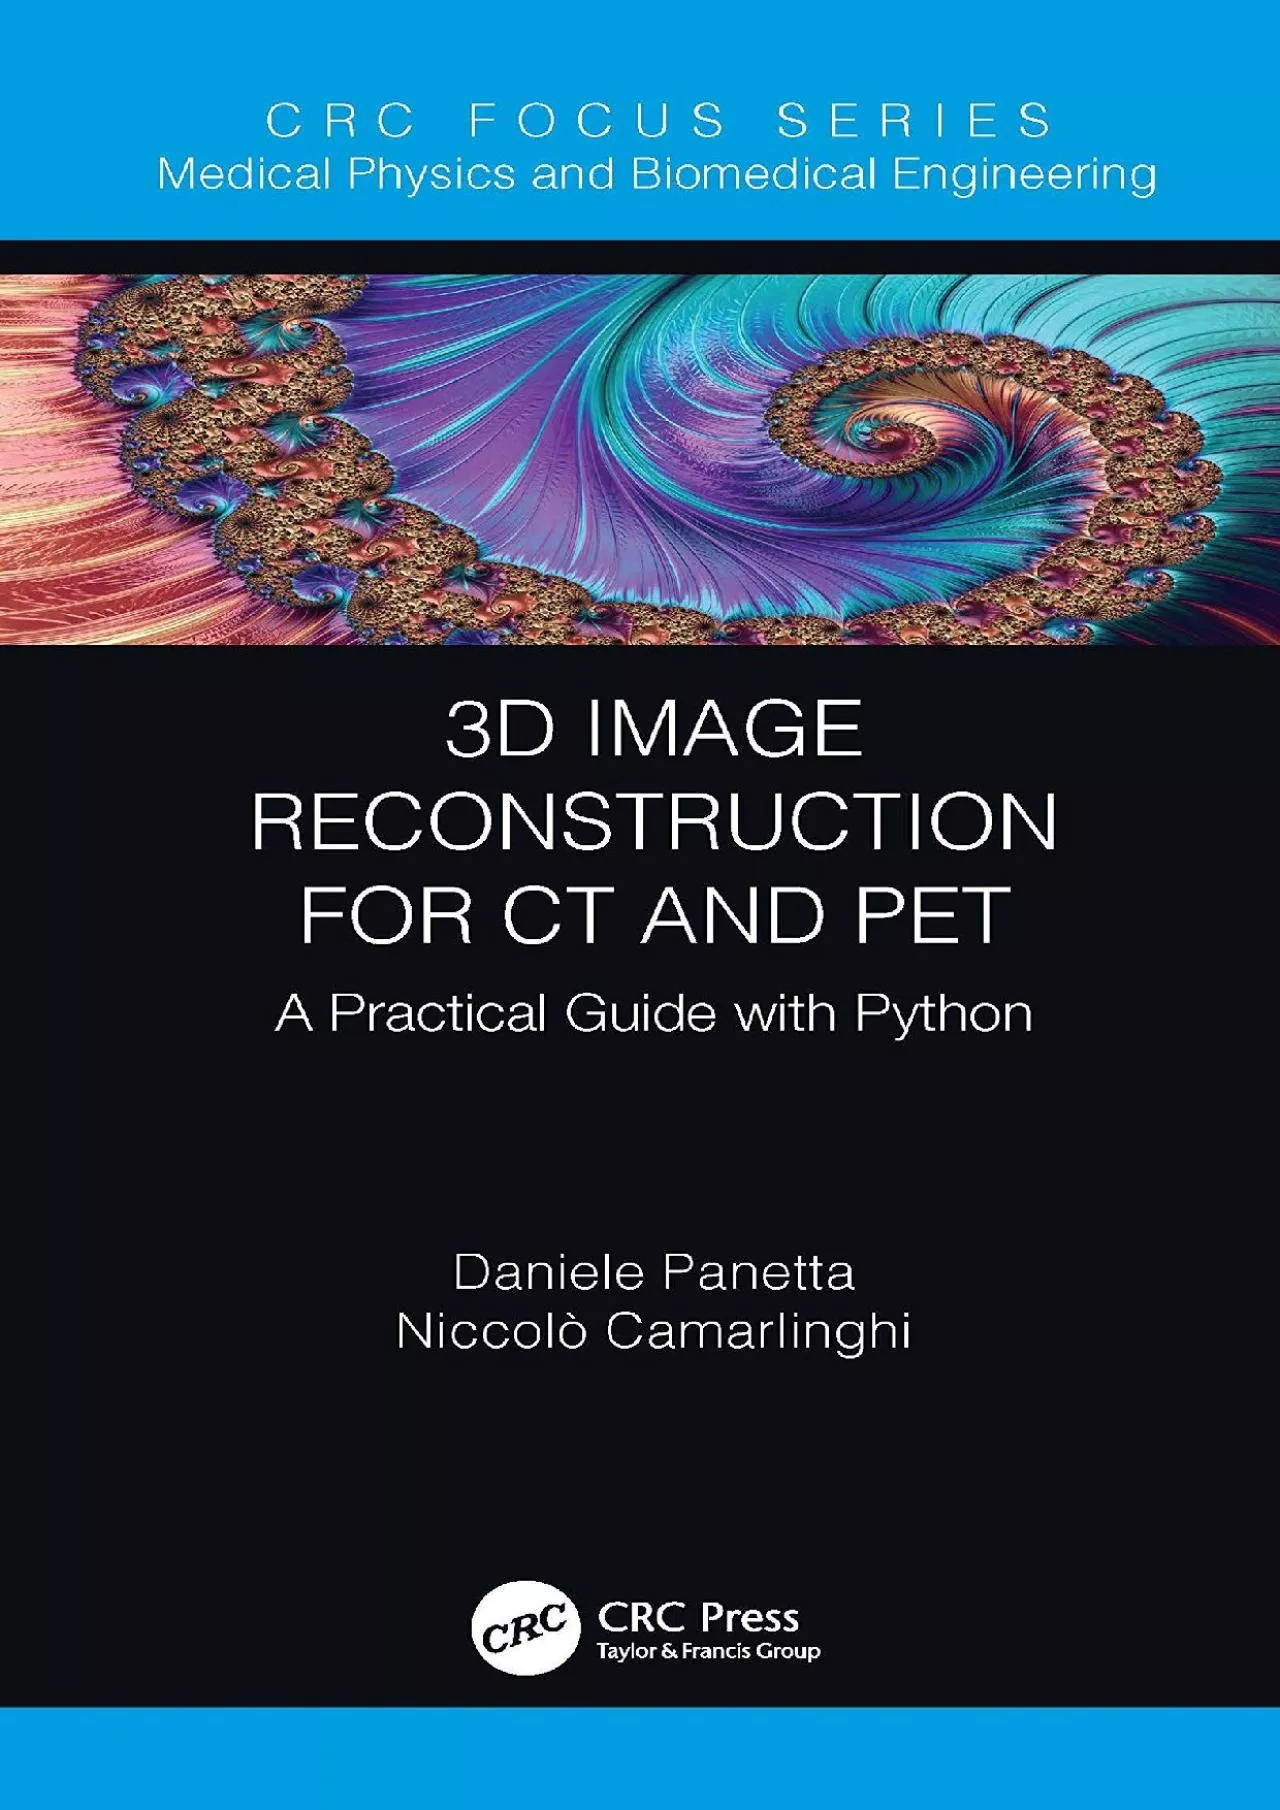 [DOWLOAD]-3D Image Reconstruction for CT and PET: A Practical Guide with Python (Focus